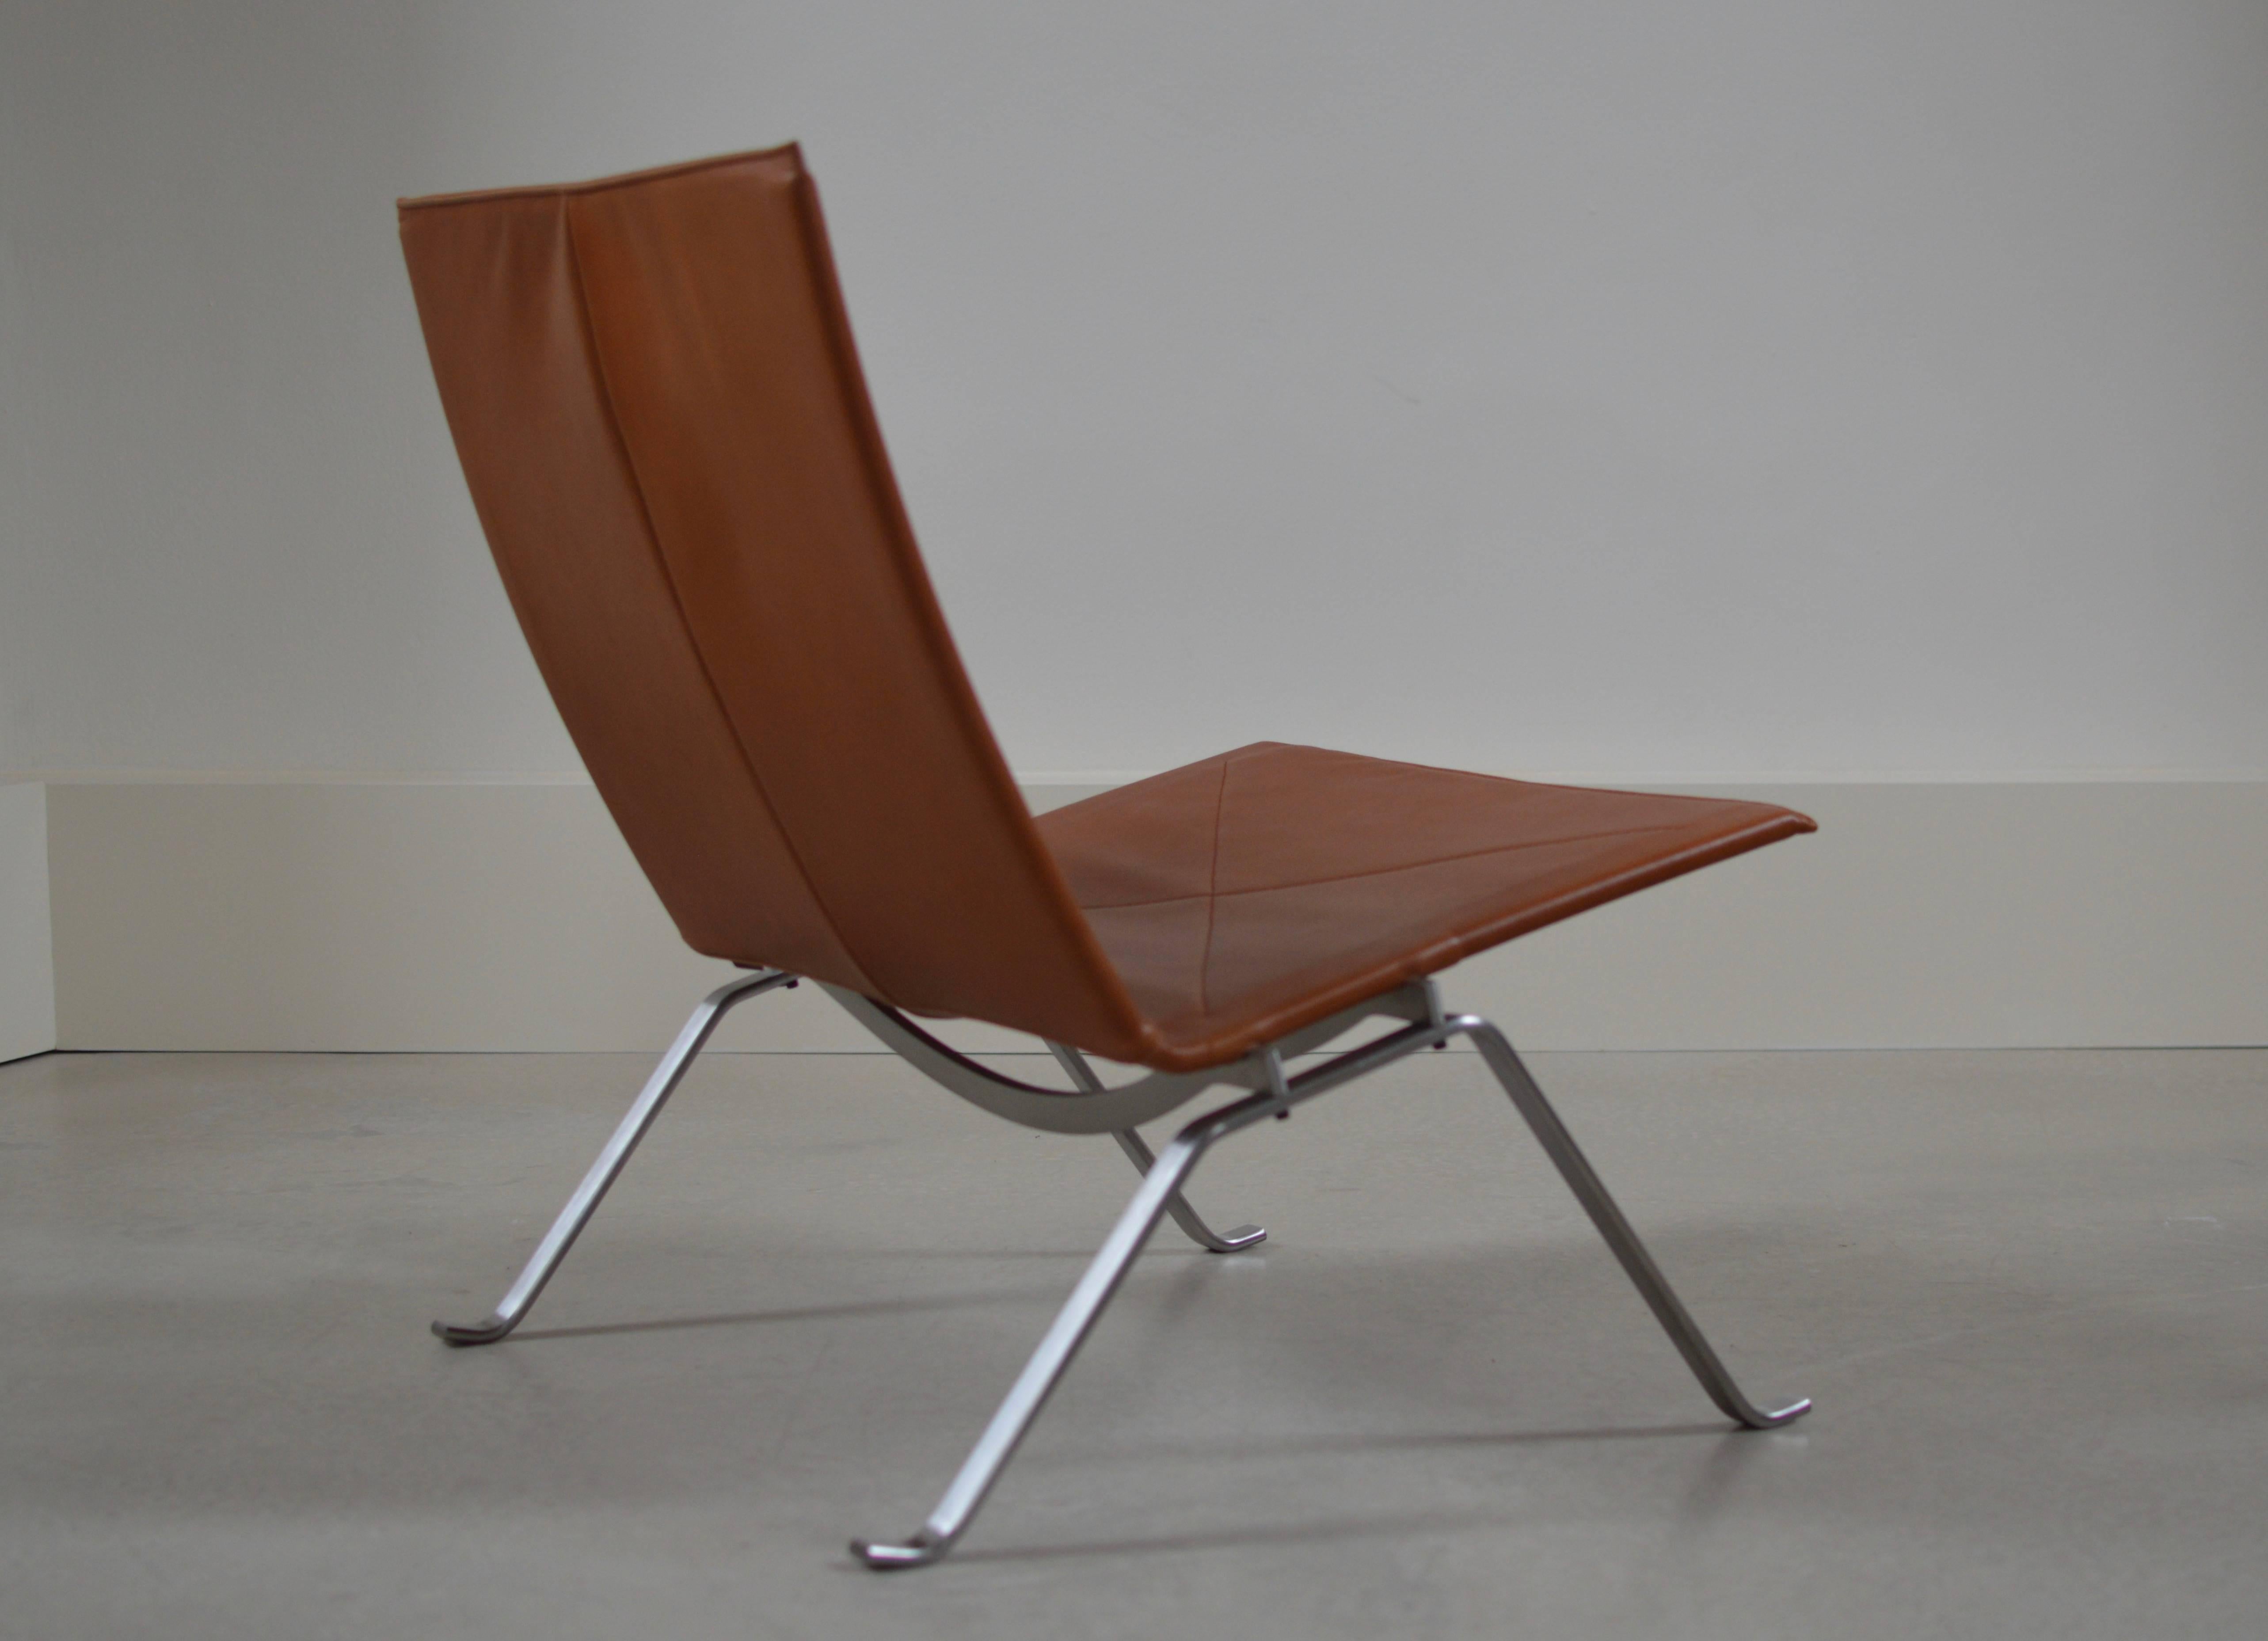 Iconic PK22 Easy Chair by Poul Kjaerholm execution by Fritz Hansen according label and markings on frame (shown on last photo) executed in most expensive leather option 'Elegance' that Fritz Hansen has to offer.  